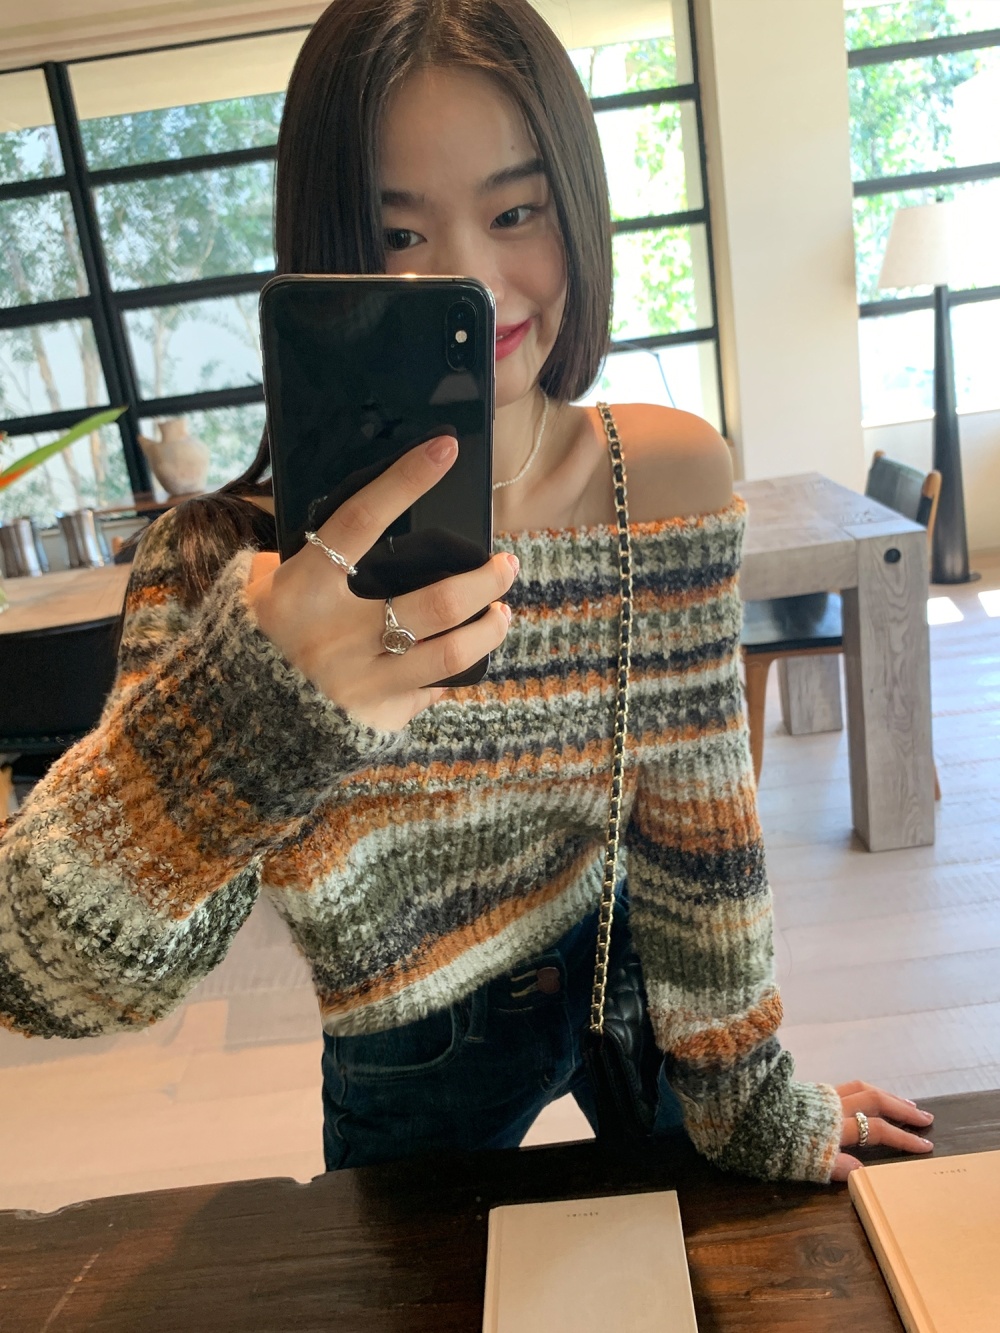 Strapless colors sweater spring clavicle for women